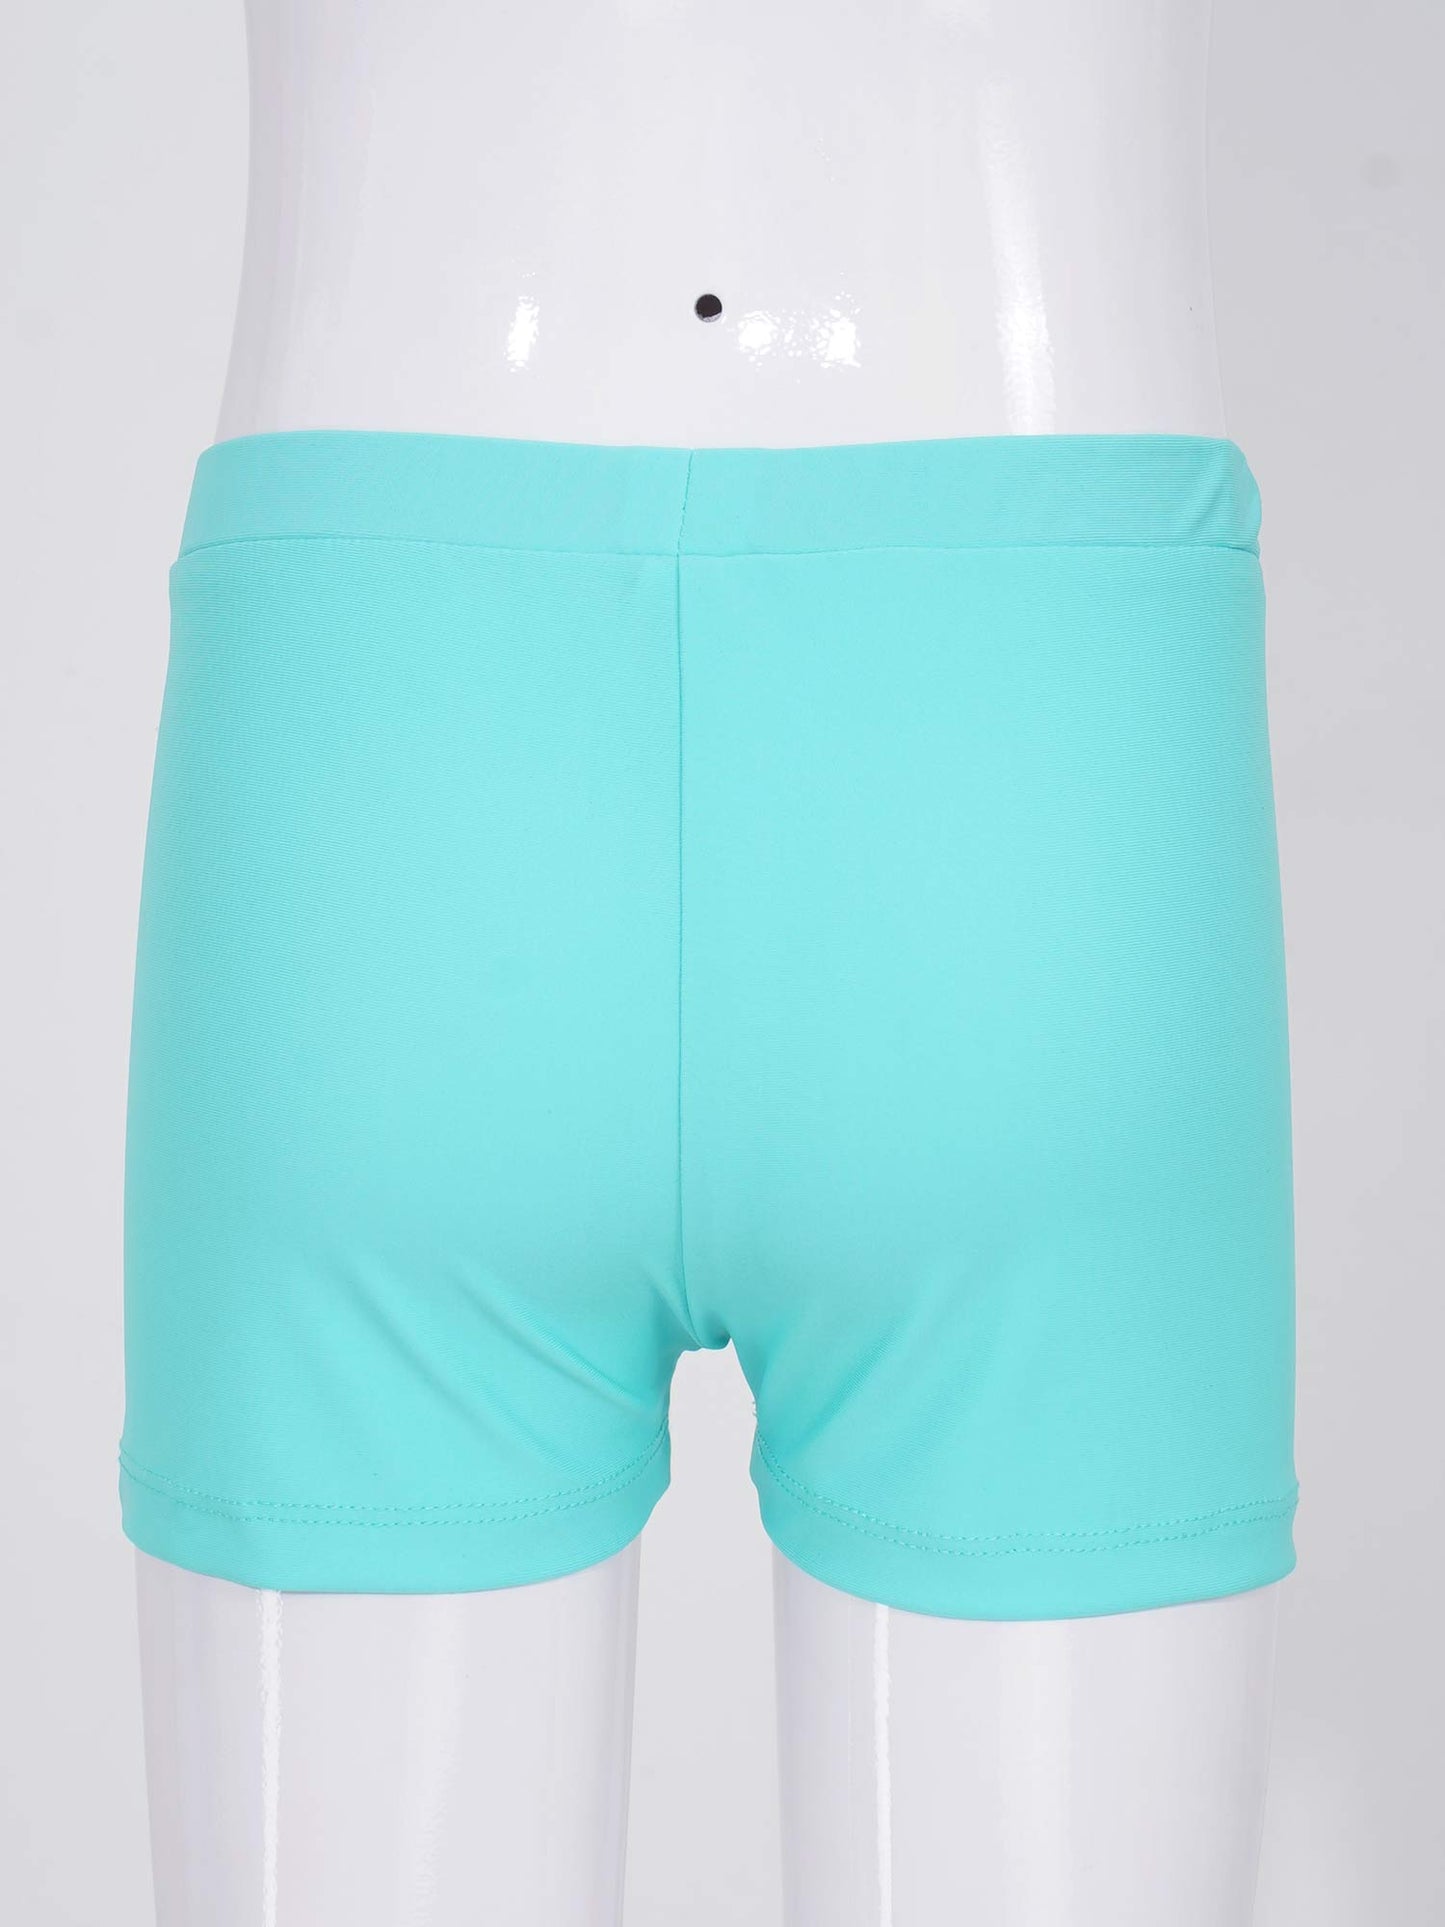 Child Girls Quick-dry Swimming Trunks Elastic Waistband Solid Color Swimwear